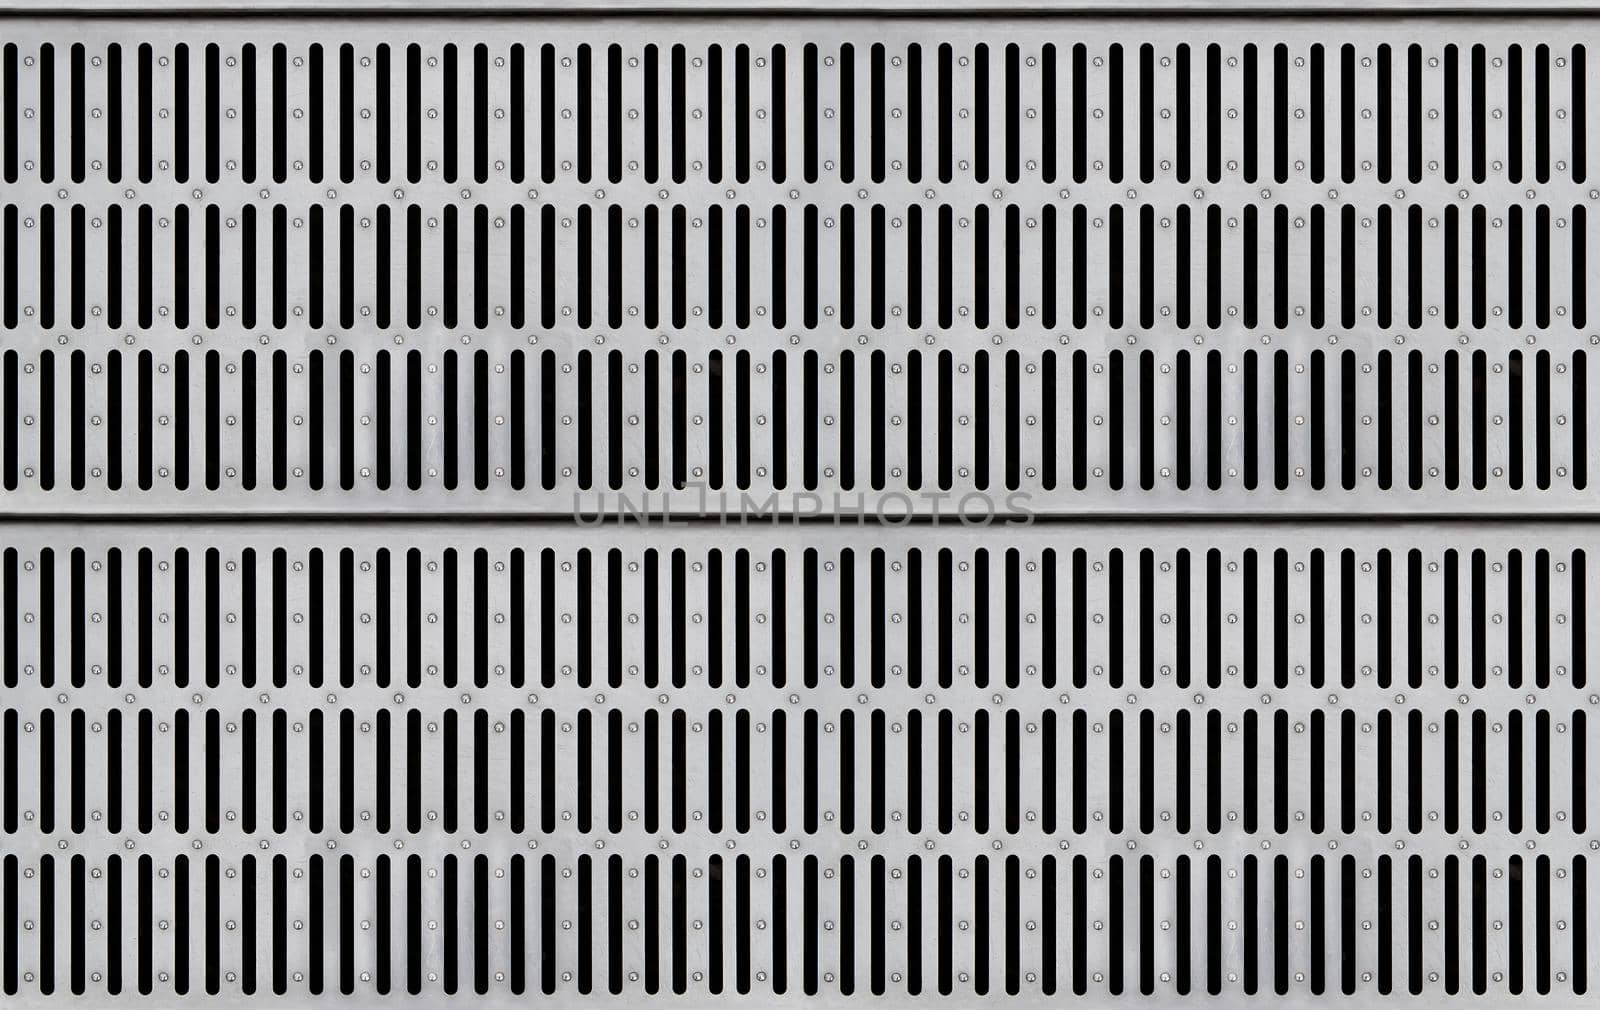 Seamless texture of silver-colored metal grate for water drain with long slits. Top view